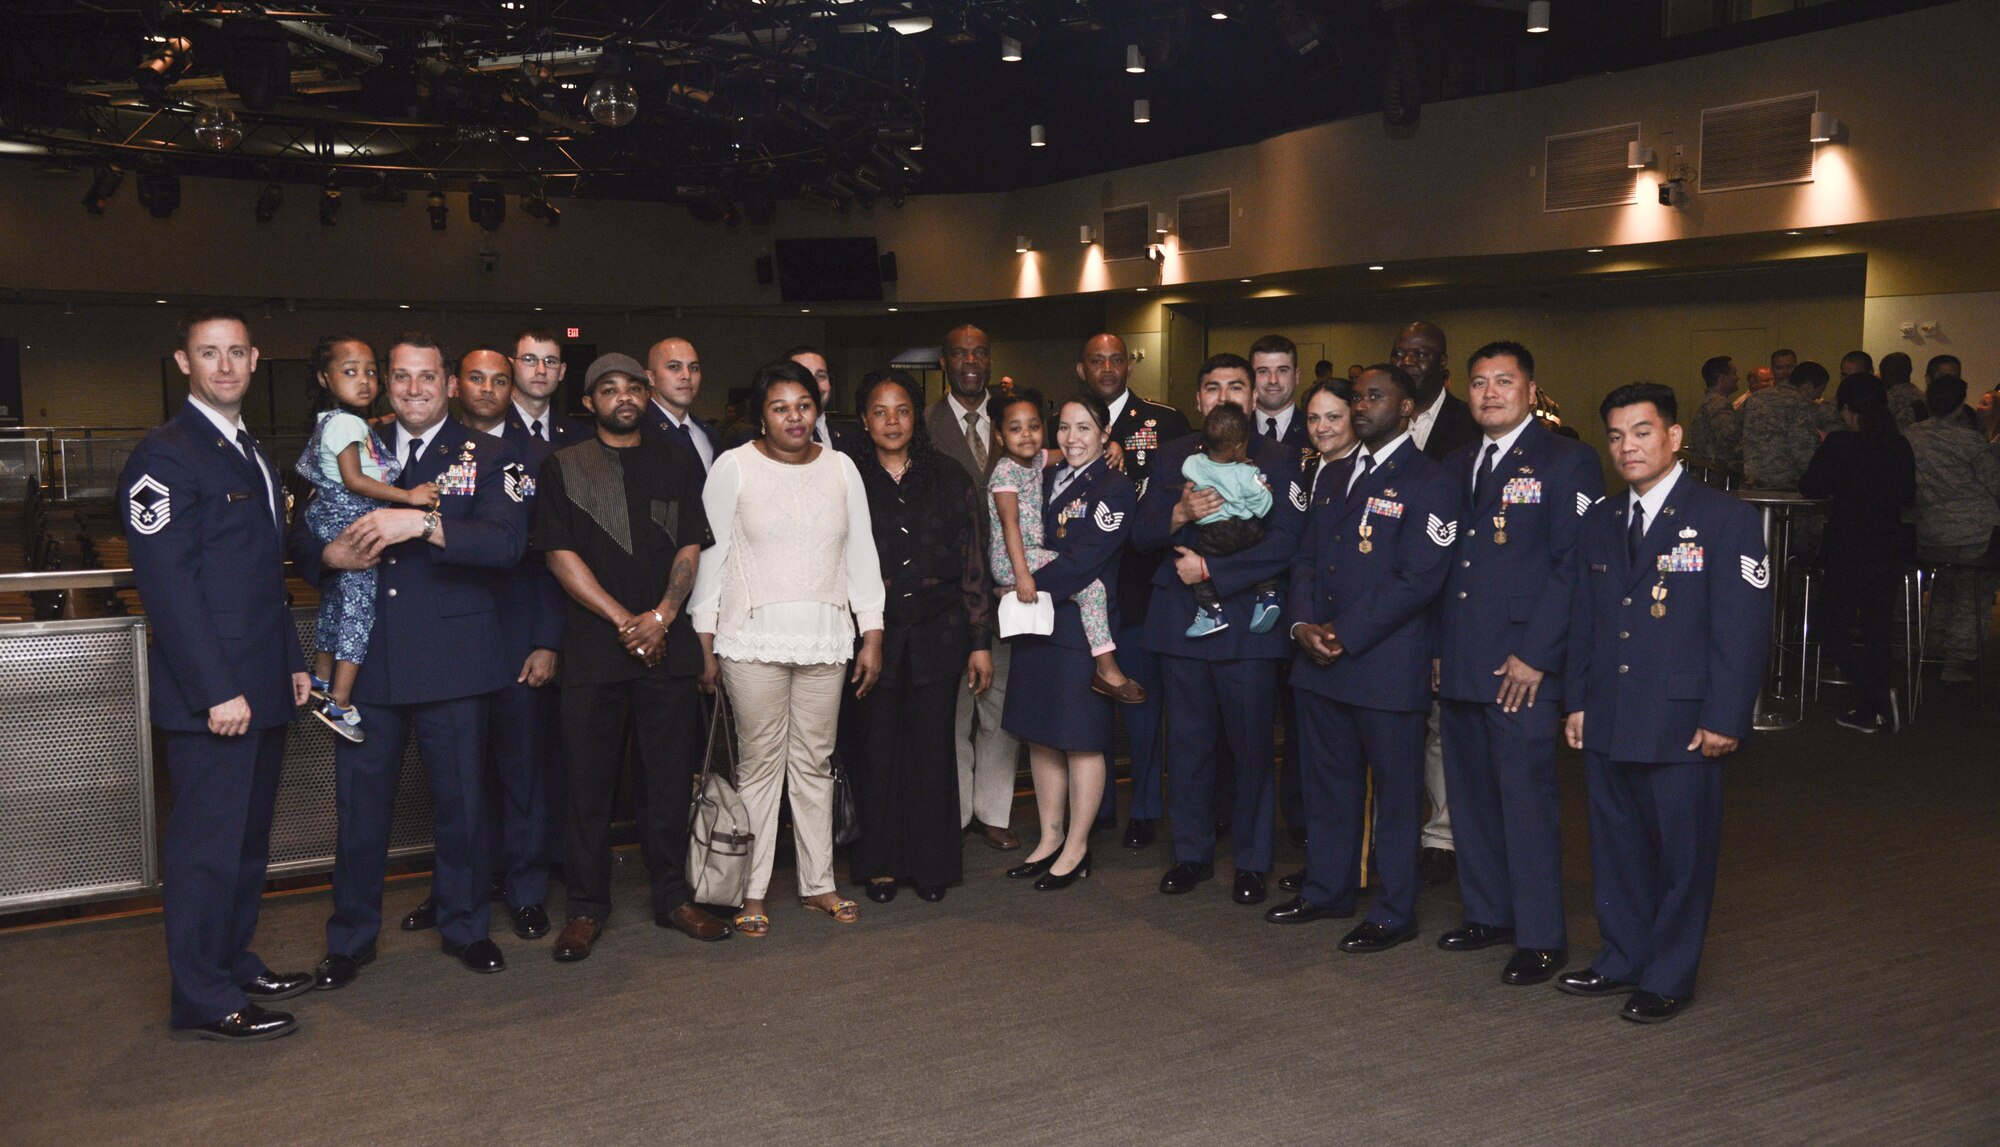 Airmen, Soldiers , and the Enyioko family along with their sister and pastor pose for a group photo at Osan Air Base, Republic of Korea, May 13, 2016. The photo was taken after an award ceremony recognizing the team of Airmen and Soldiers who saved the lives of four locals from a burning building in Songtan, Republic of Korea. Each Airman and Soldier involved with the rescue received an Air Force  Commendation Medal and the civilian received a Command Civilian Award For Valor. (U.S. Air Force photo by Tech. Sgt. Travis Edwards)